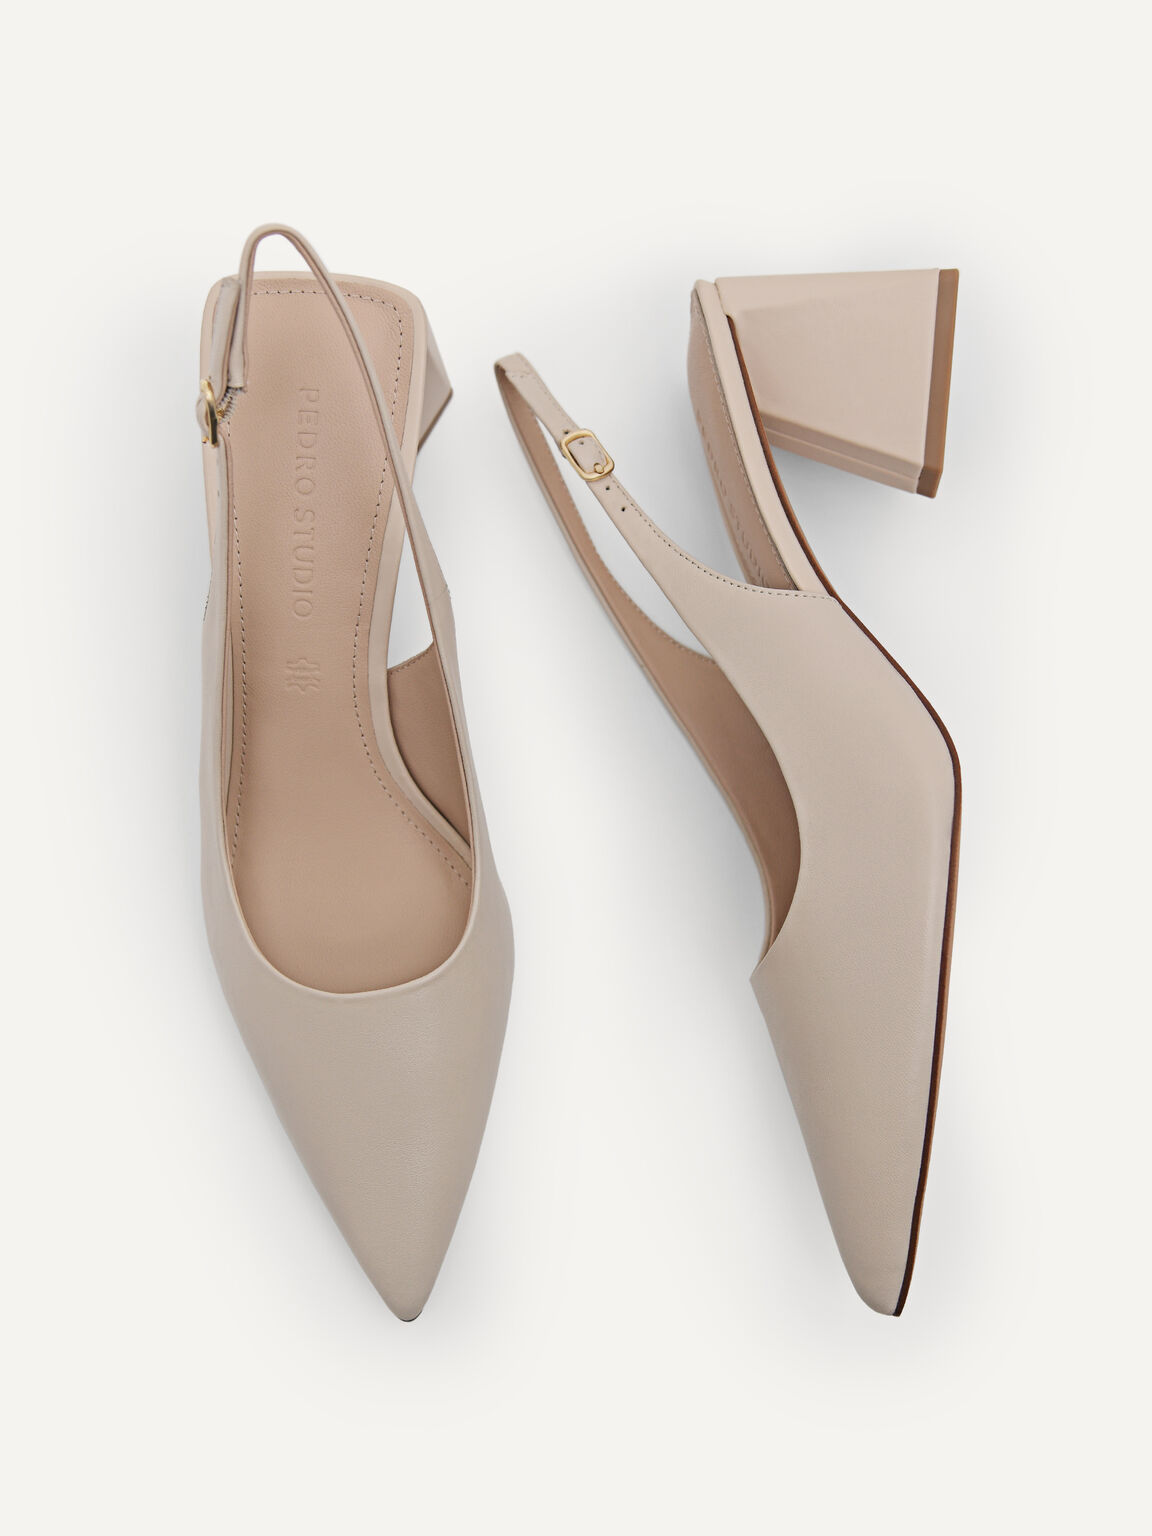 Leather Pointed Slingback Pumps, Nude